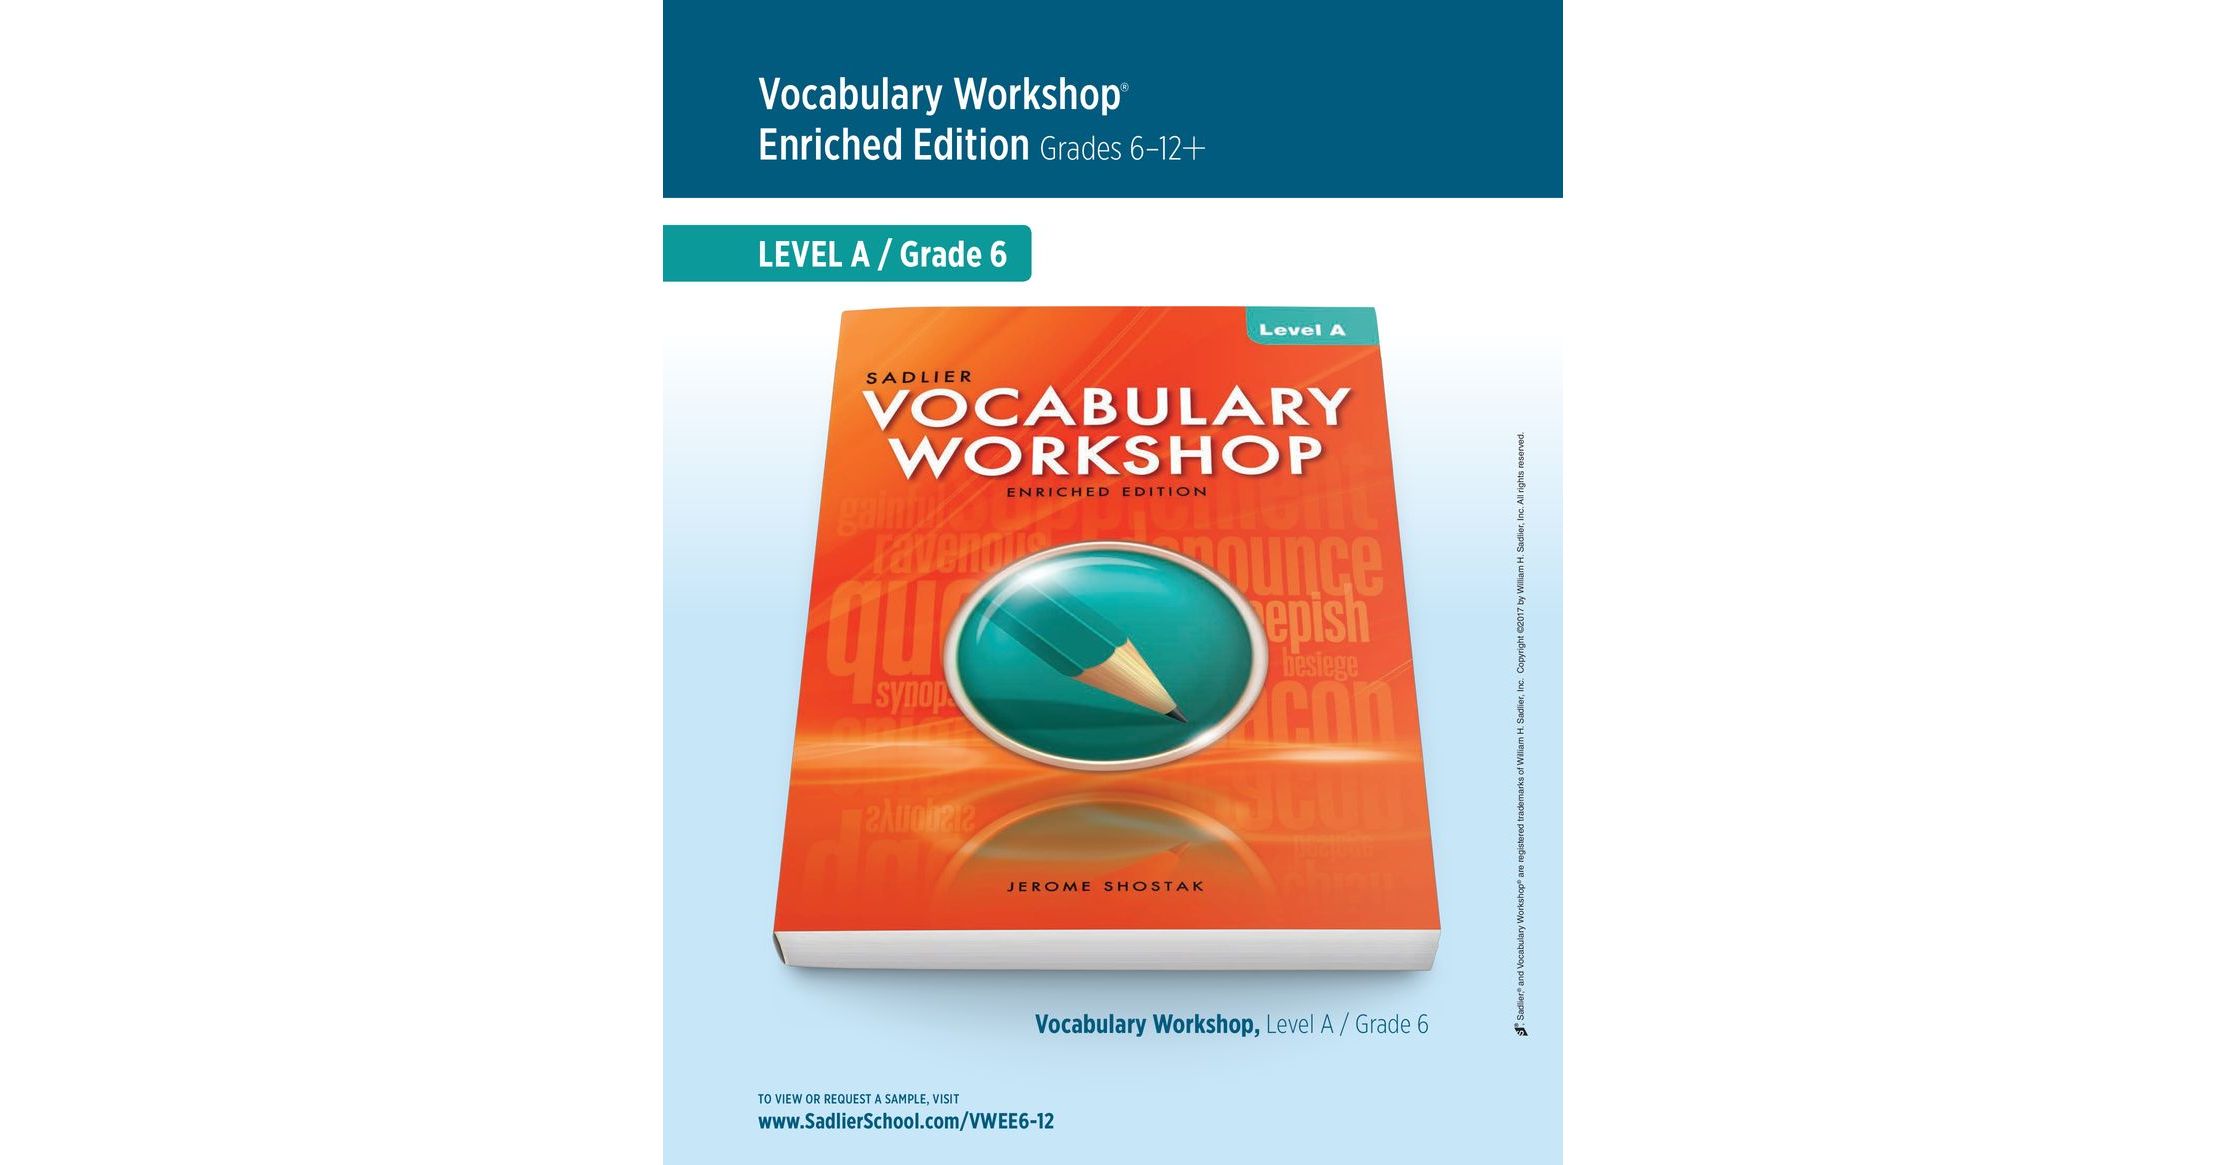 Vocabulary Workshop Enriched Edition, Level A (Grade 6), Student Edition